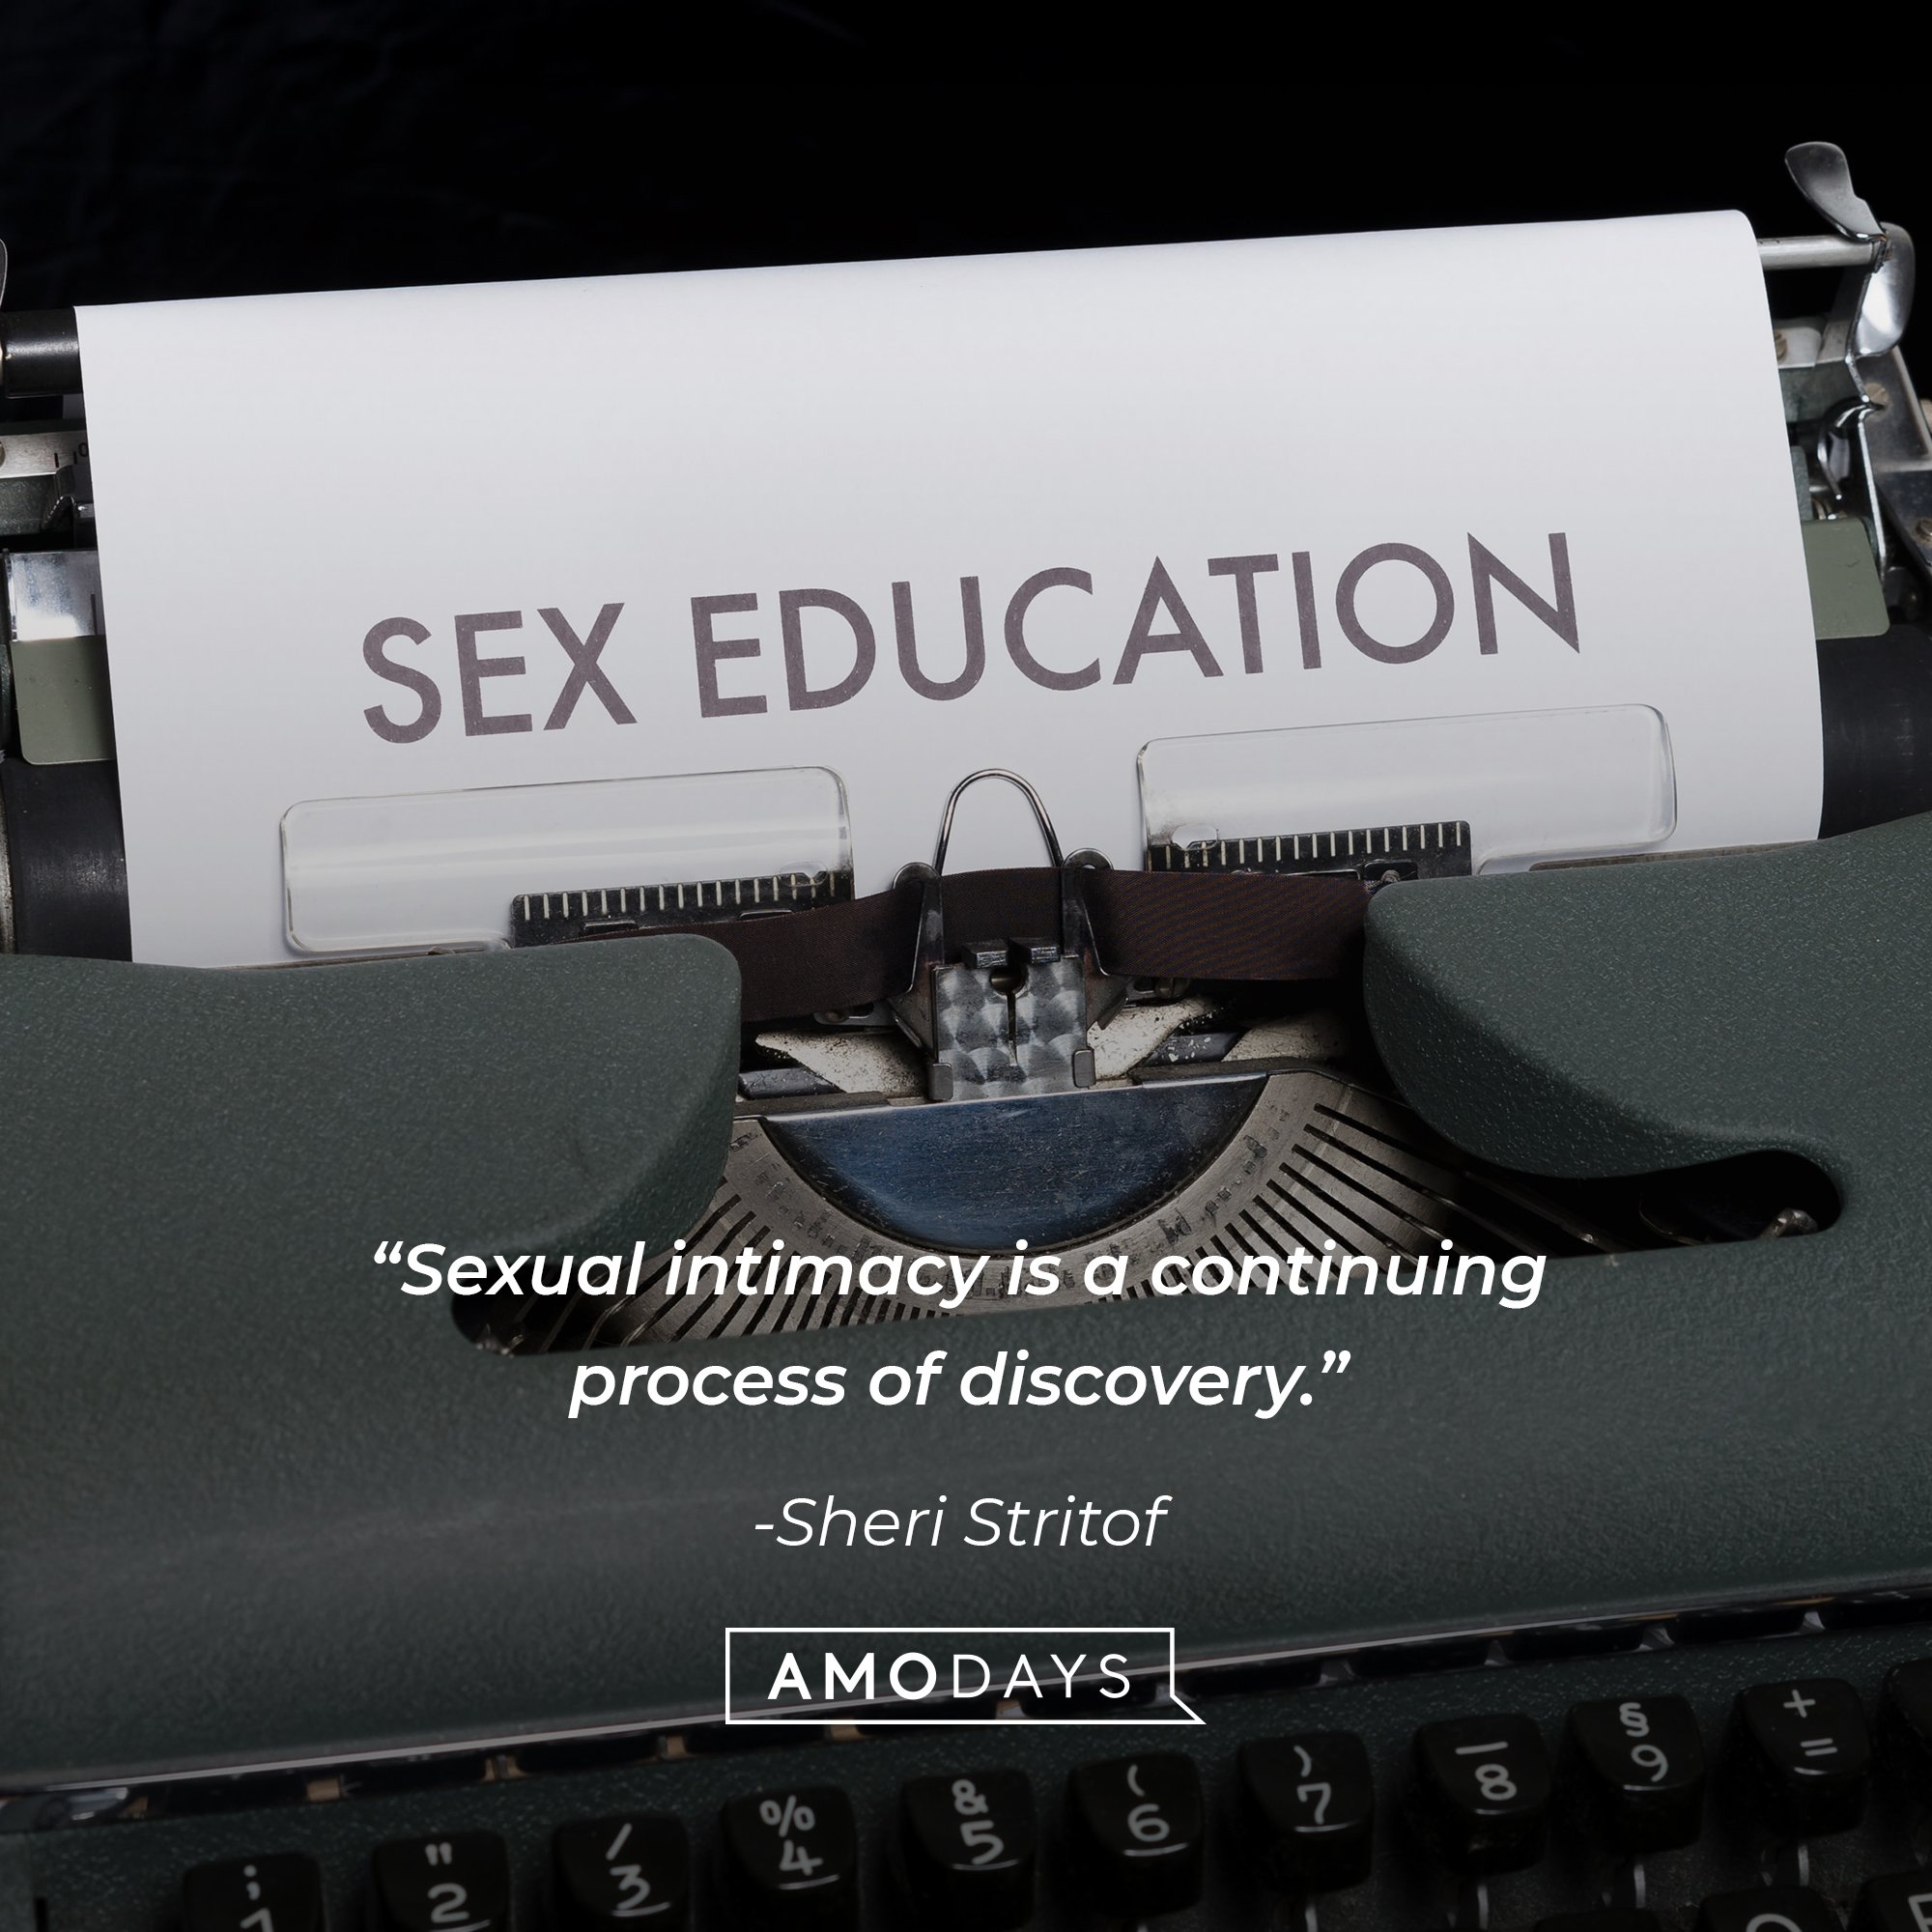  Sheri Stritof’s quote: “Sexual intimacy is a continuing process of discovery.”  | Image: AmoDays